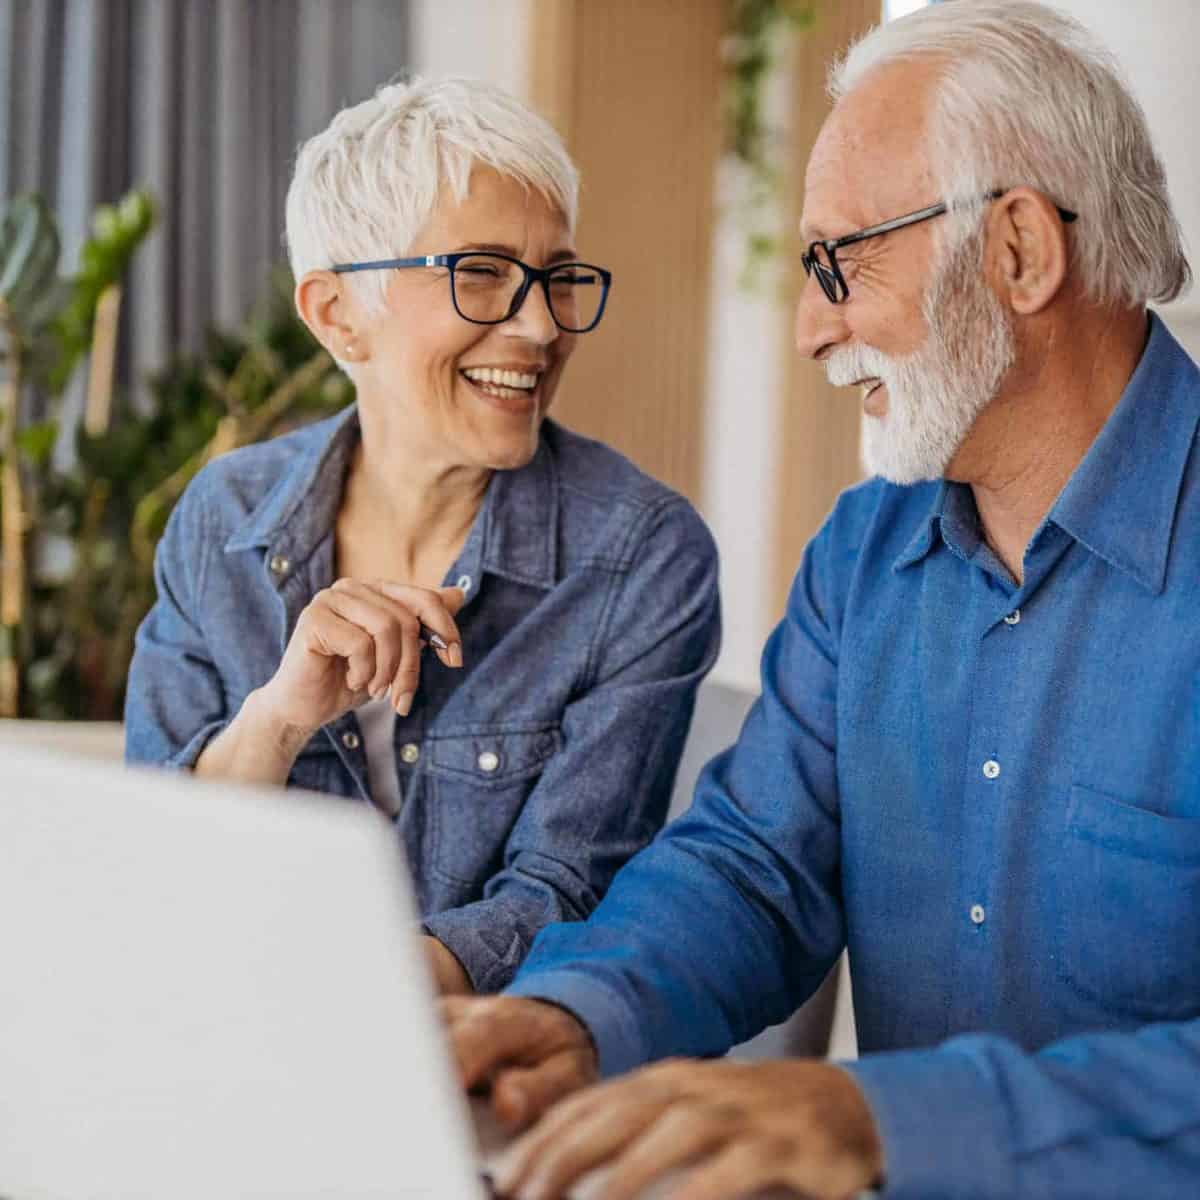 Arlington Precious Metals IRA & Investing Company Copy of Senior couple at laptop smiling GettyImages 1323096524 1200x1200 1